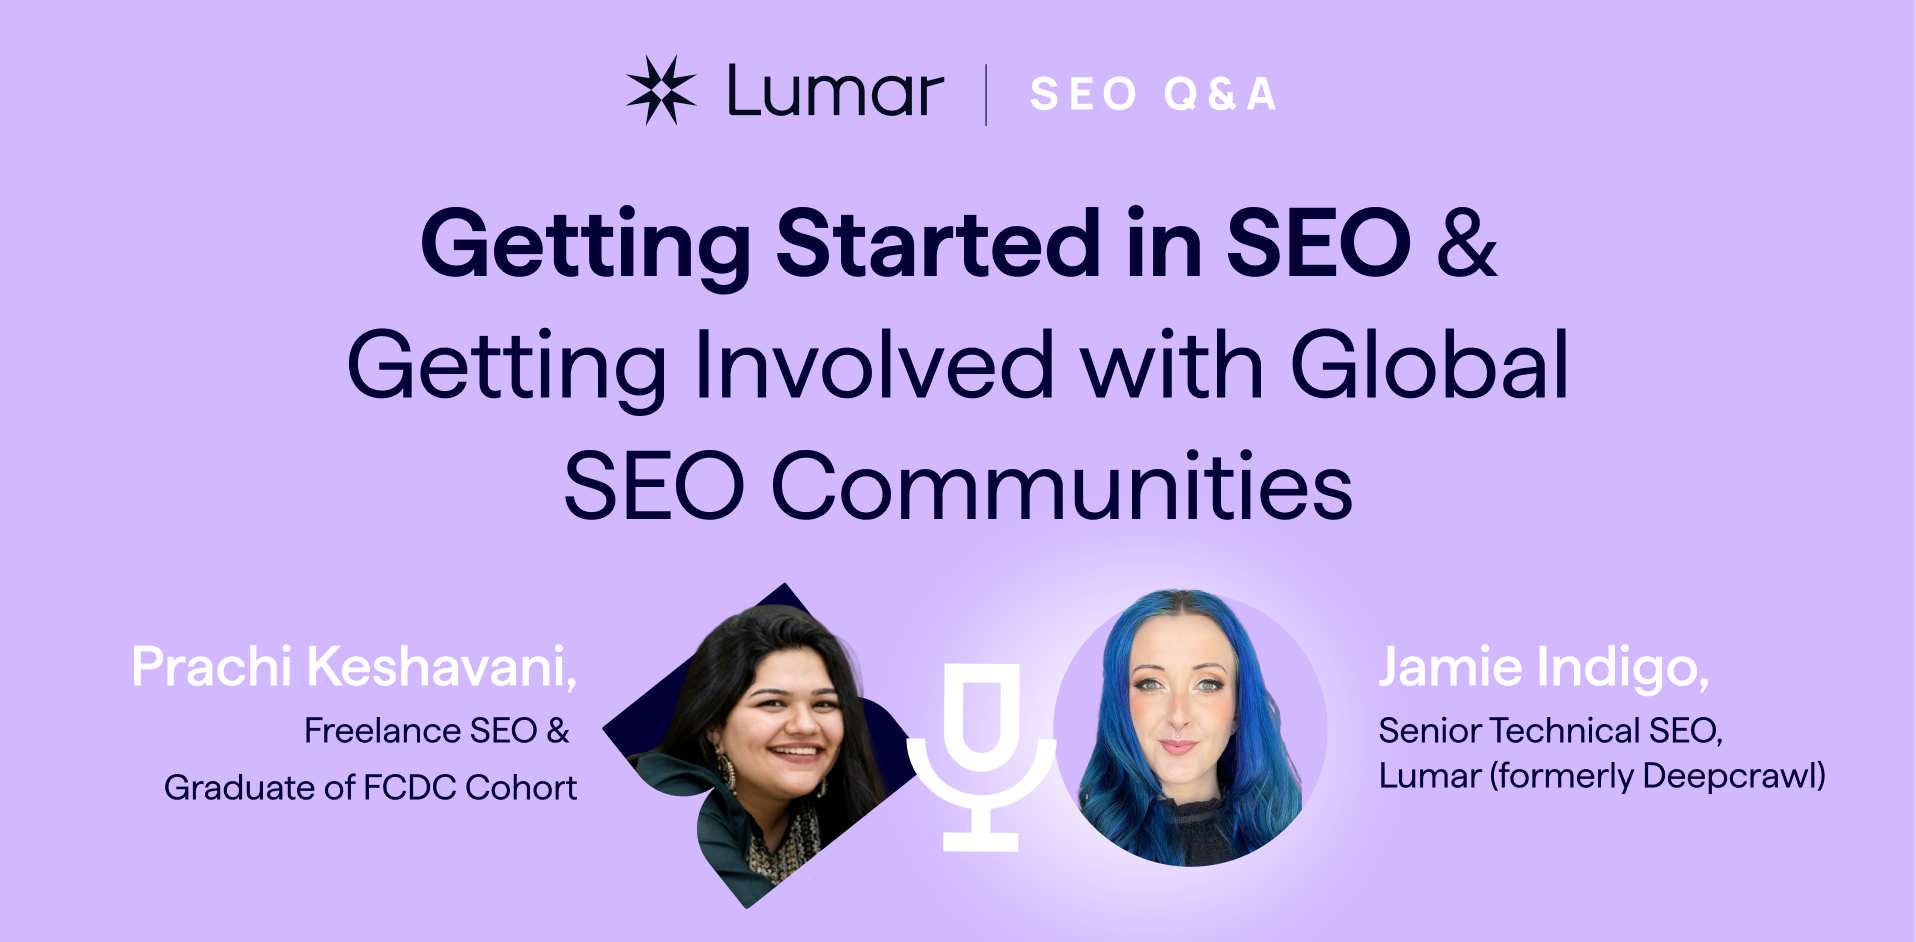 SEO Interview: Getting Started in SEO & Getting Involved with Global SEO Communities